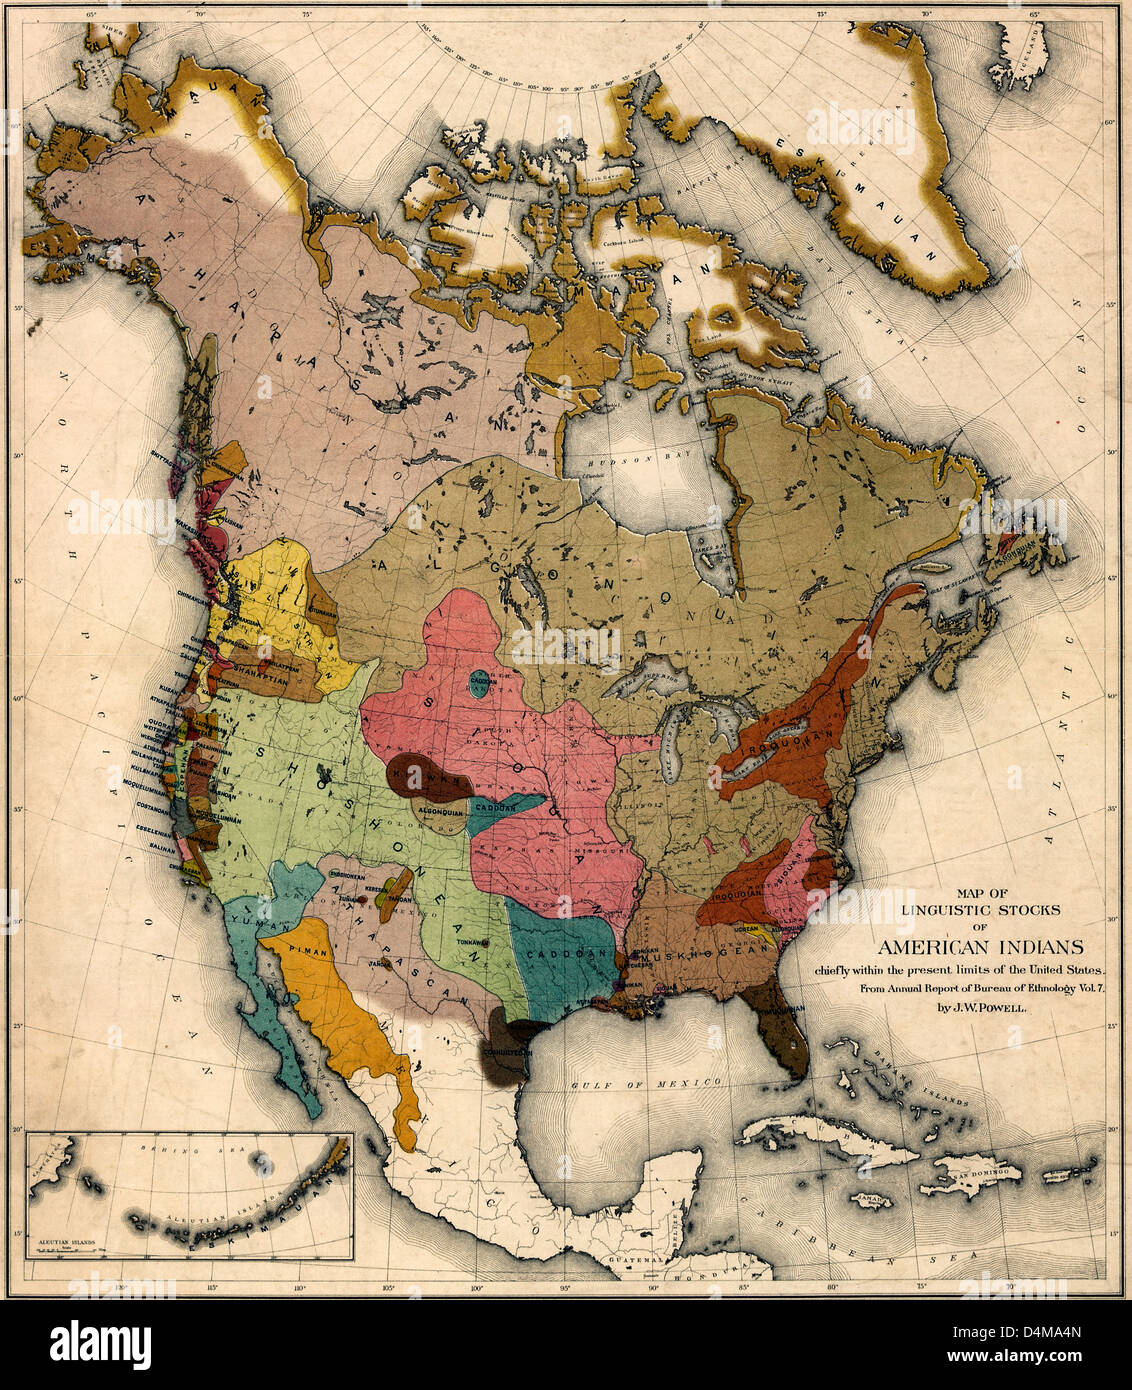 Map of linguistic stocks of American Indians. 1890 Stock Photo